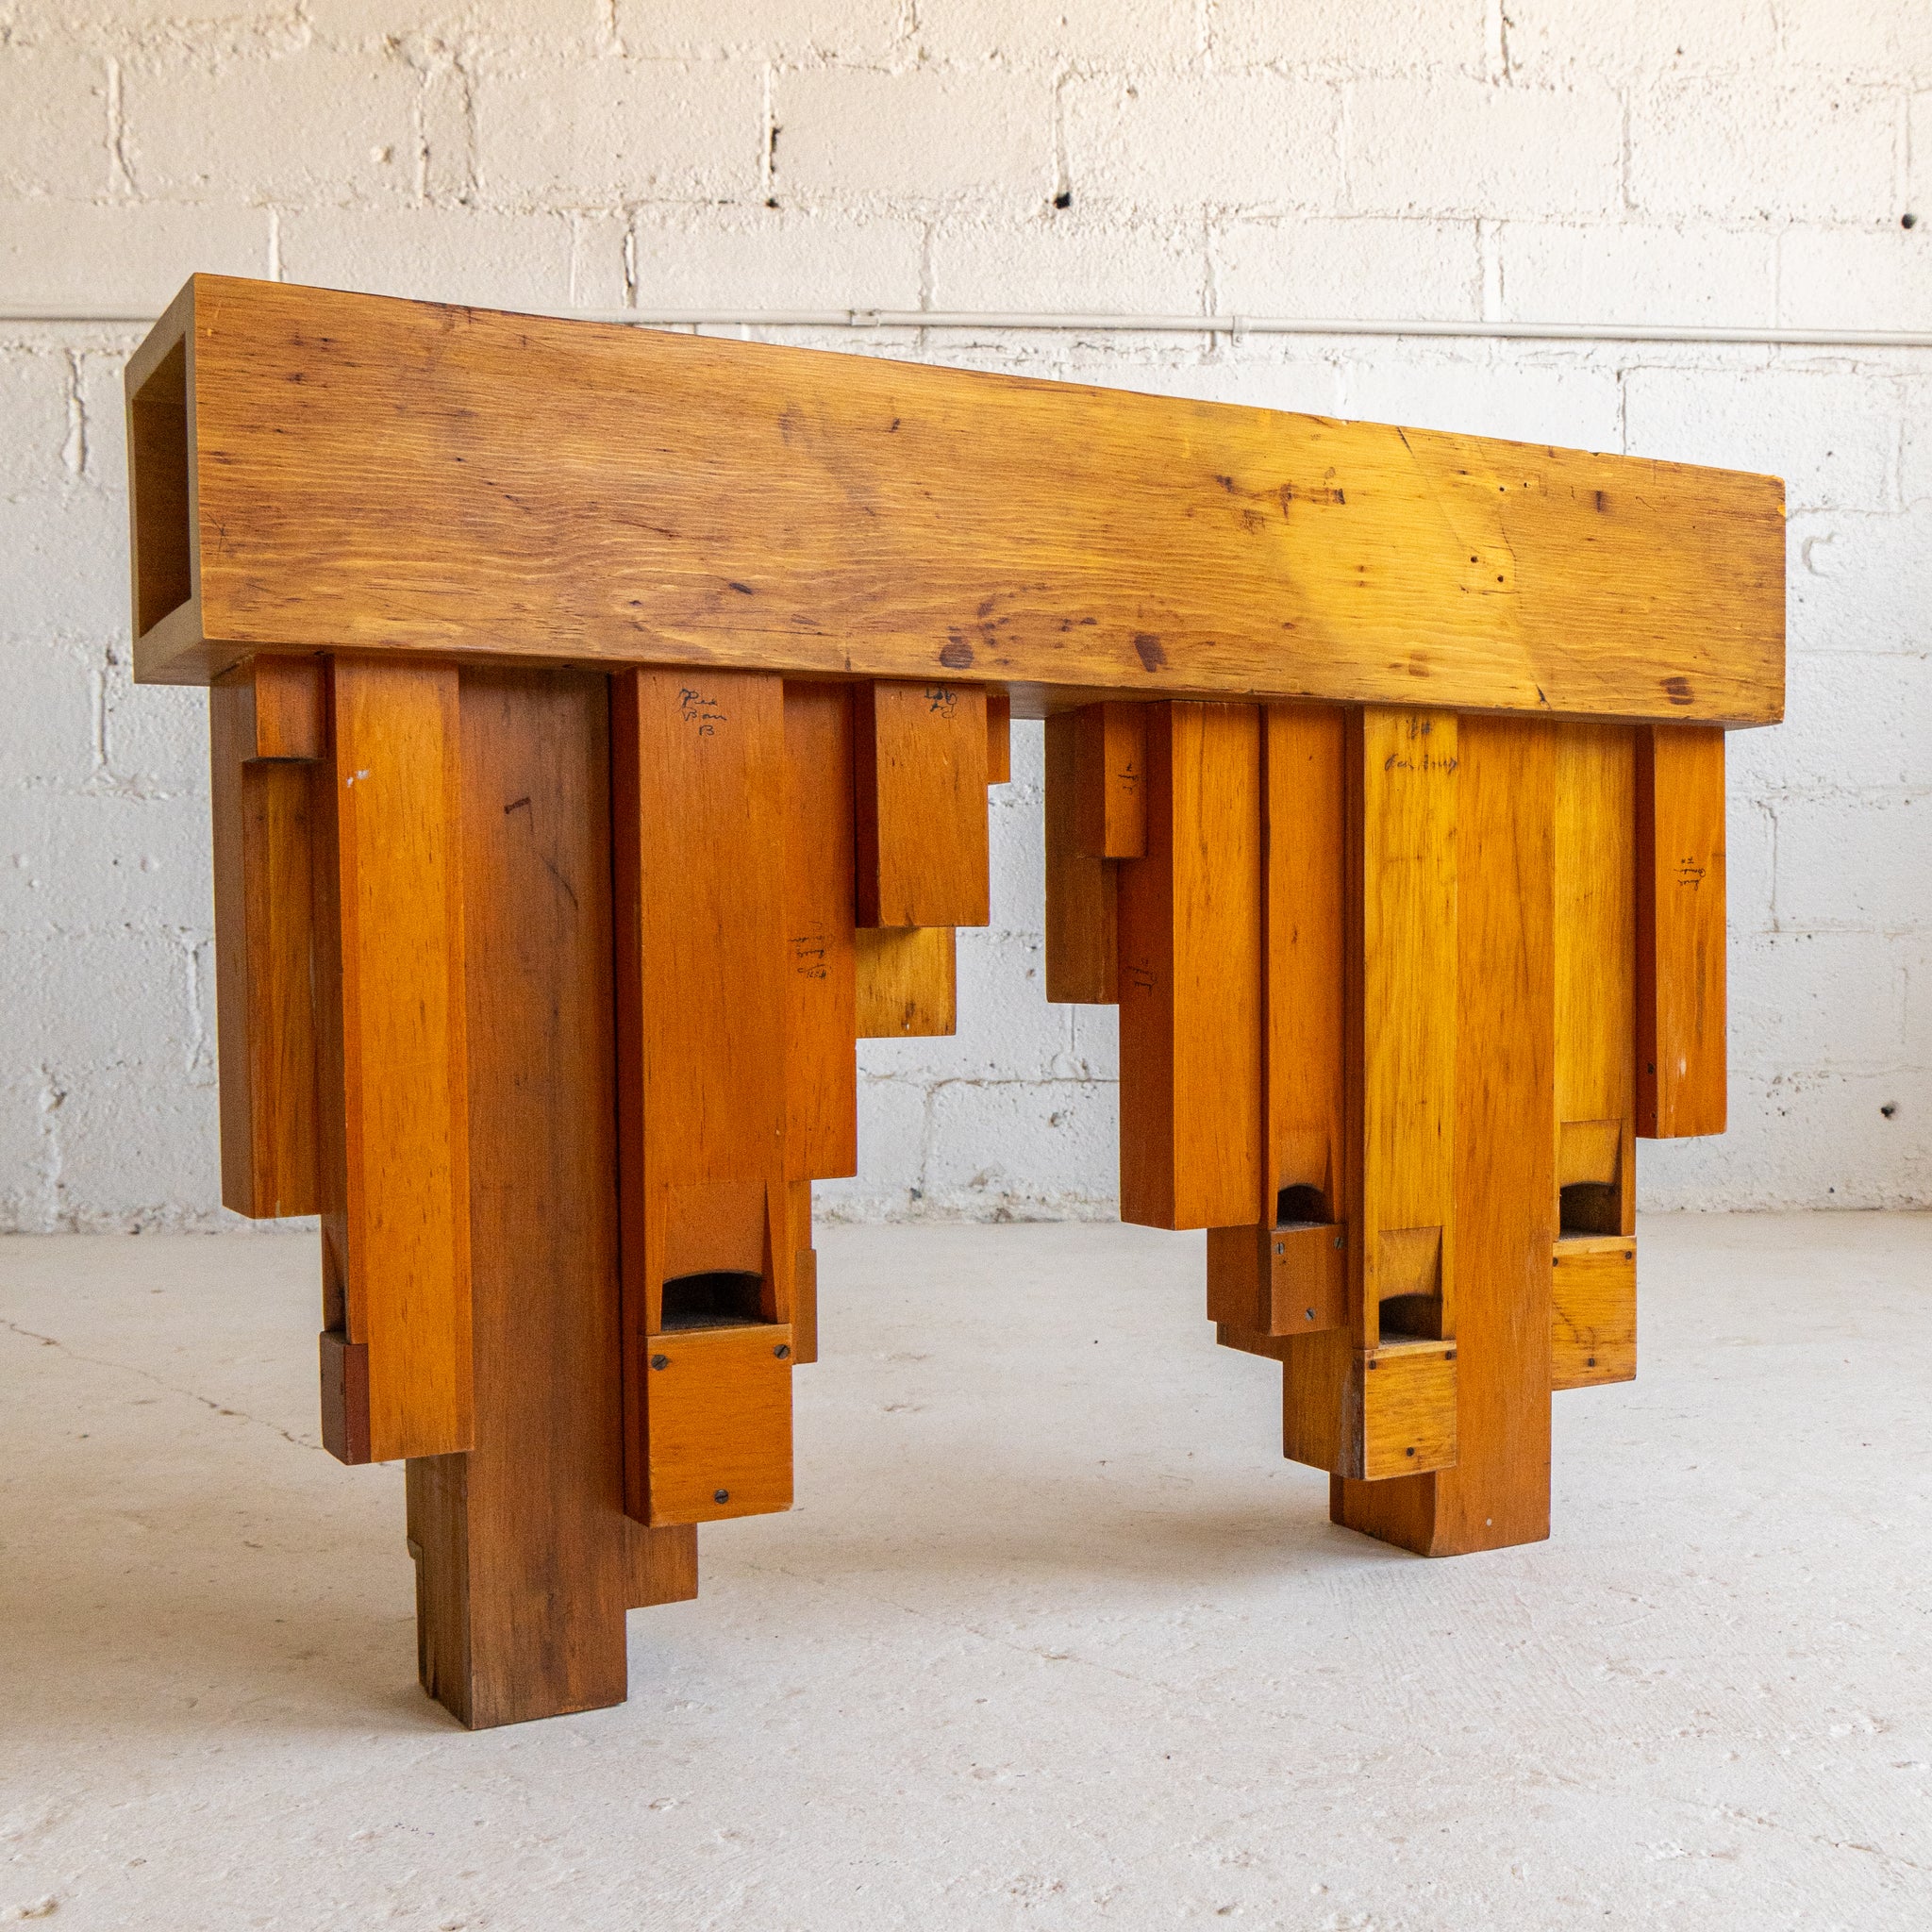 pipe organ entry table 4 full view reclaimed wood